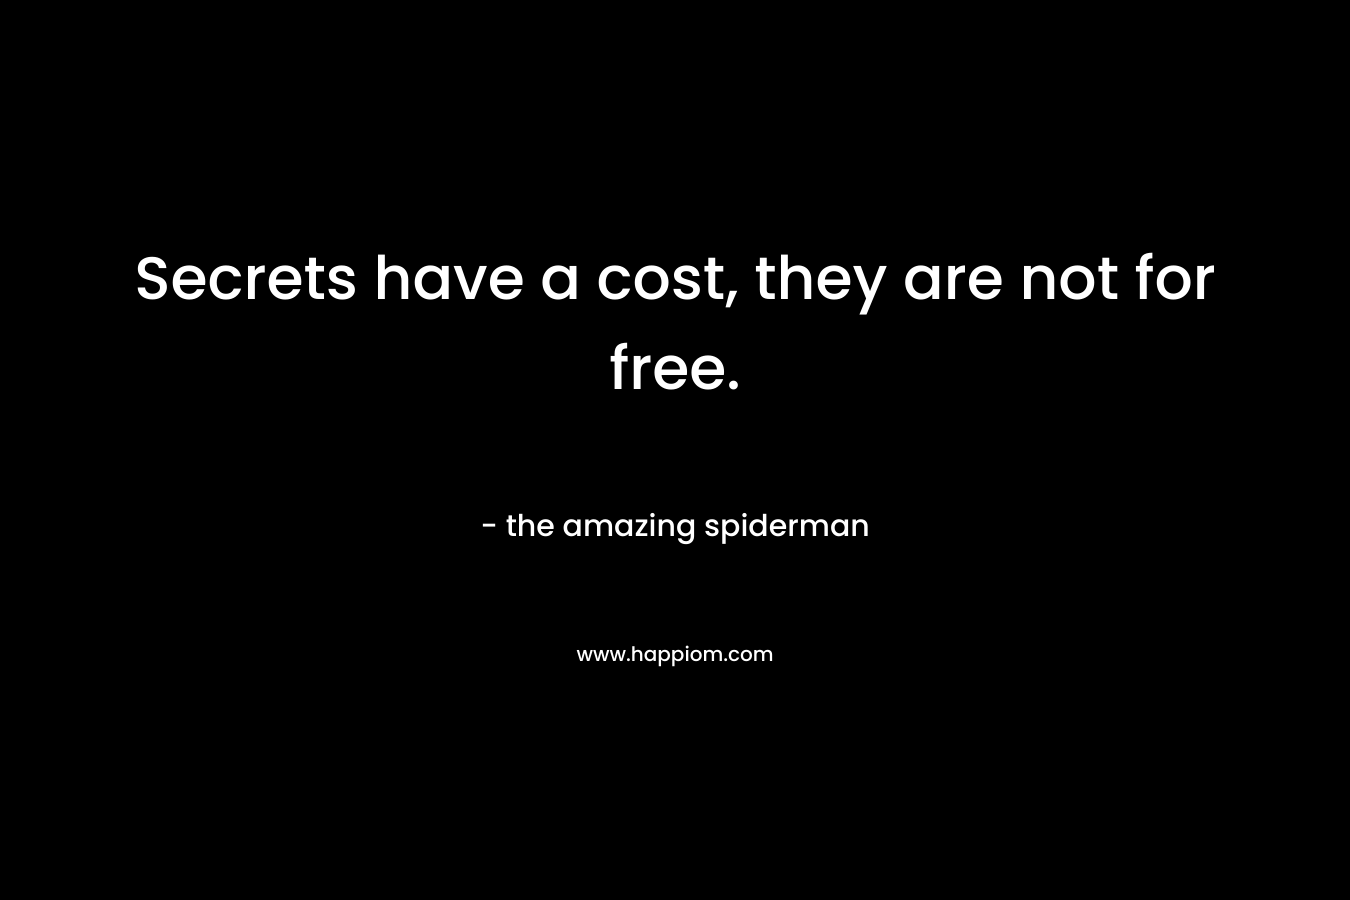 Secrets have a cost, they are not for free. – the amazing spiderman